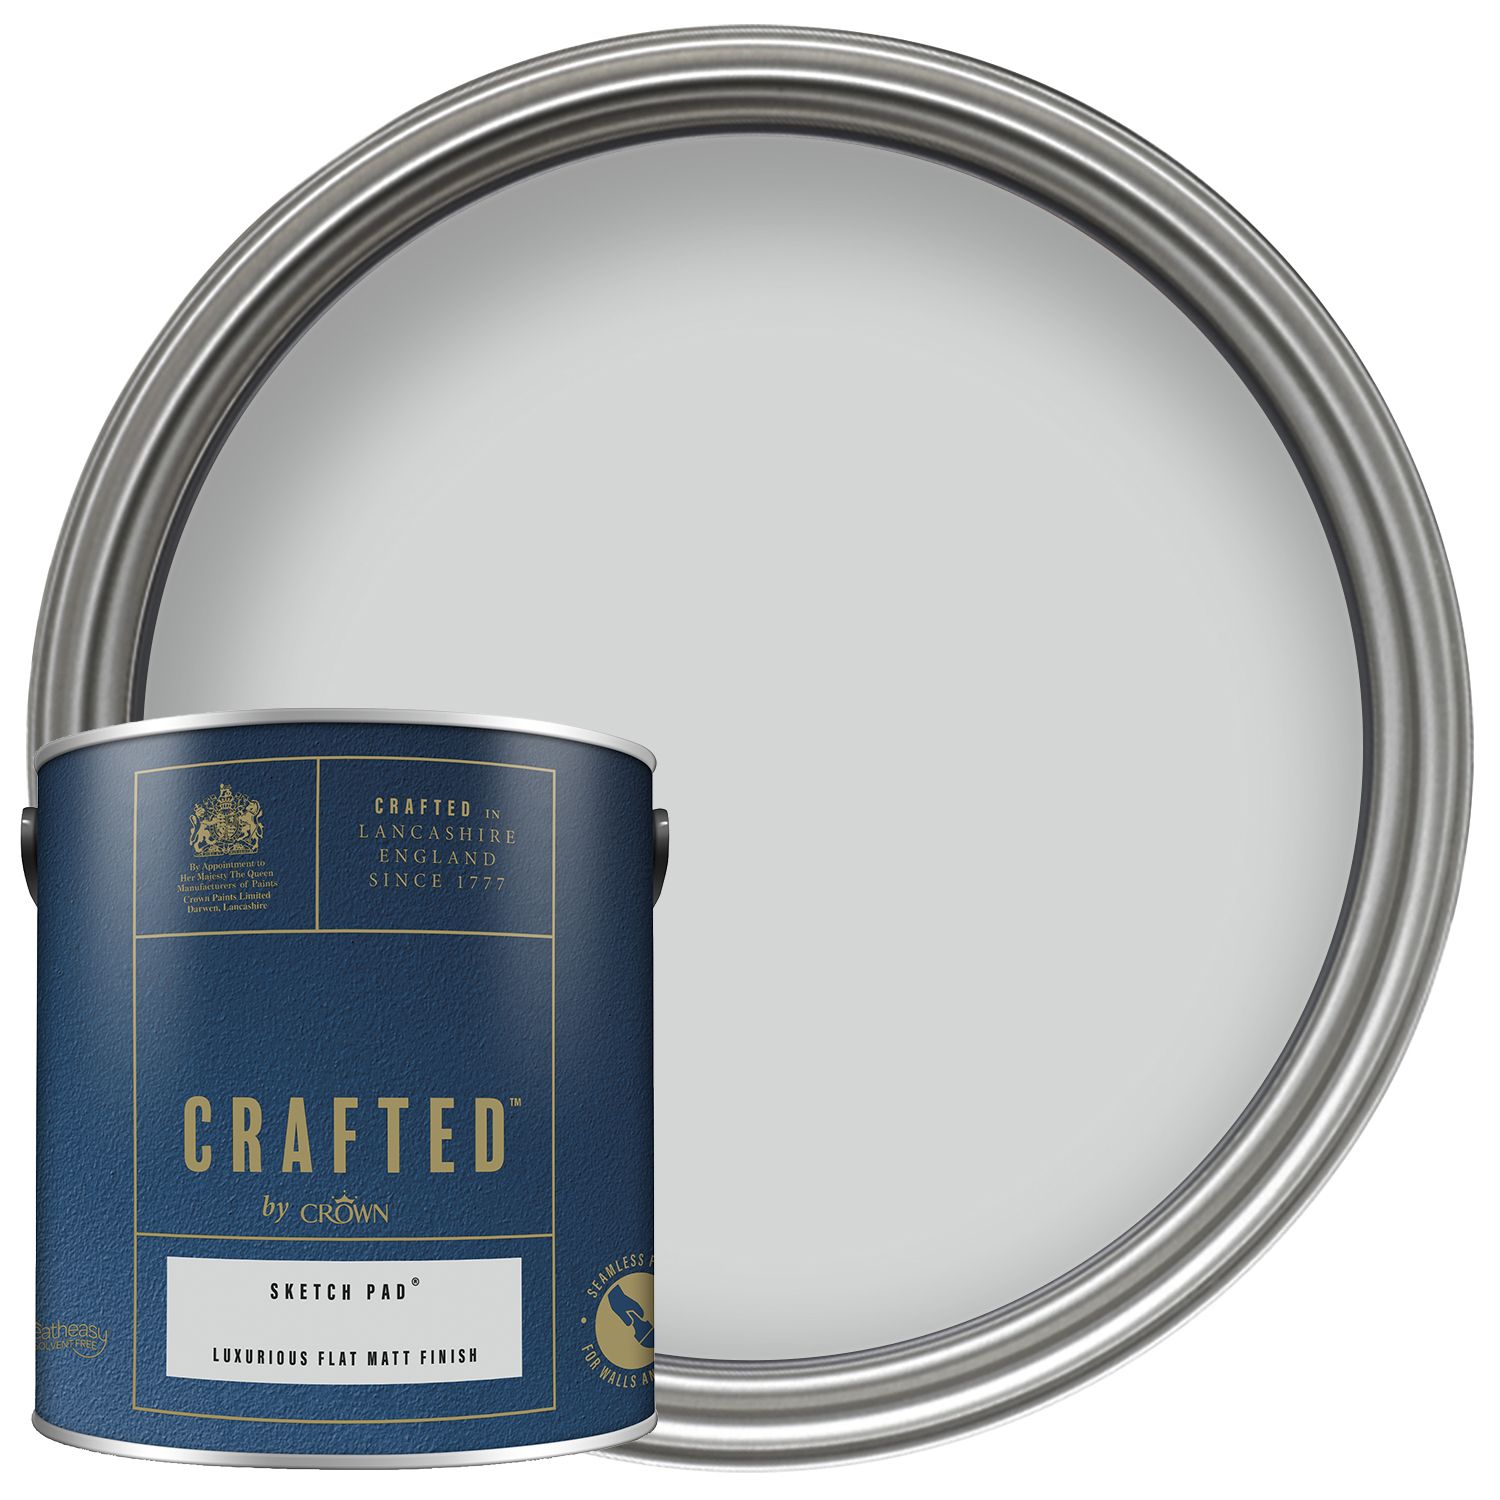 Image of CRAFTED™ by Crown Flat Matt Emulsion Interior Paint - Sketch Pad™ - 2.5L